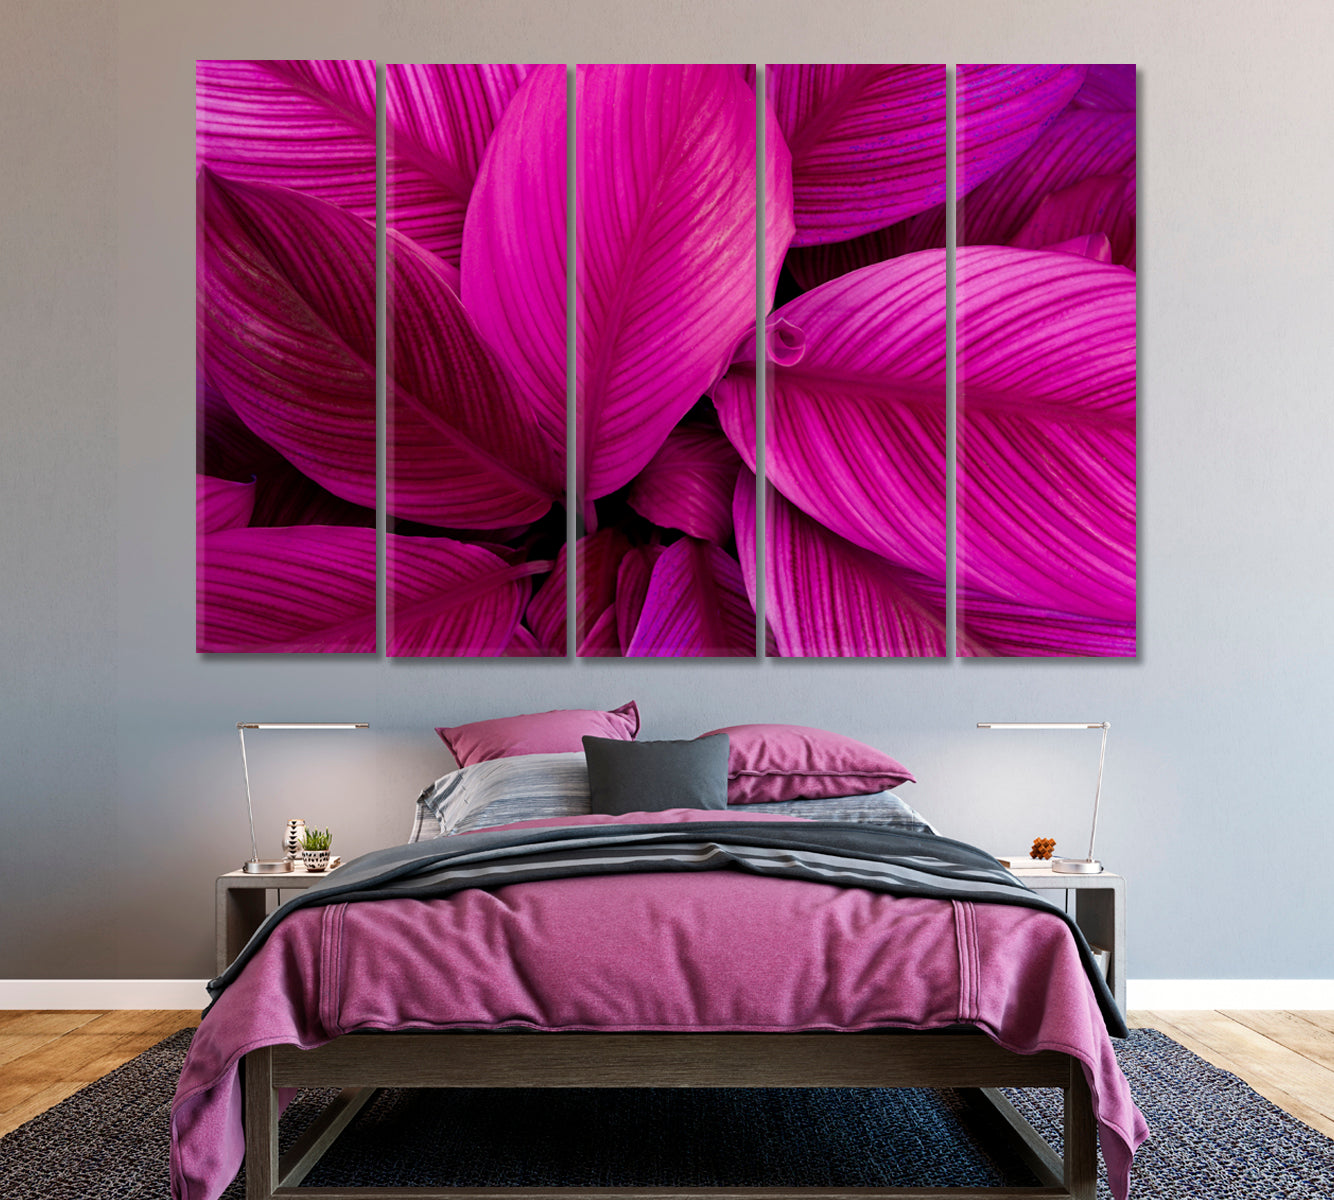 Leaves of Spathiphyllum Cannifolium Canvas Print ArtLexy 5 Panels 36"x24" inches 